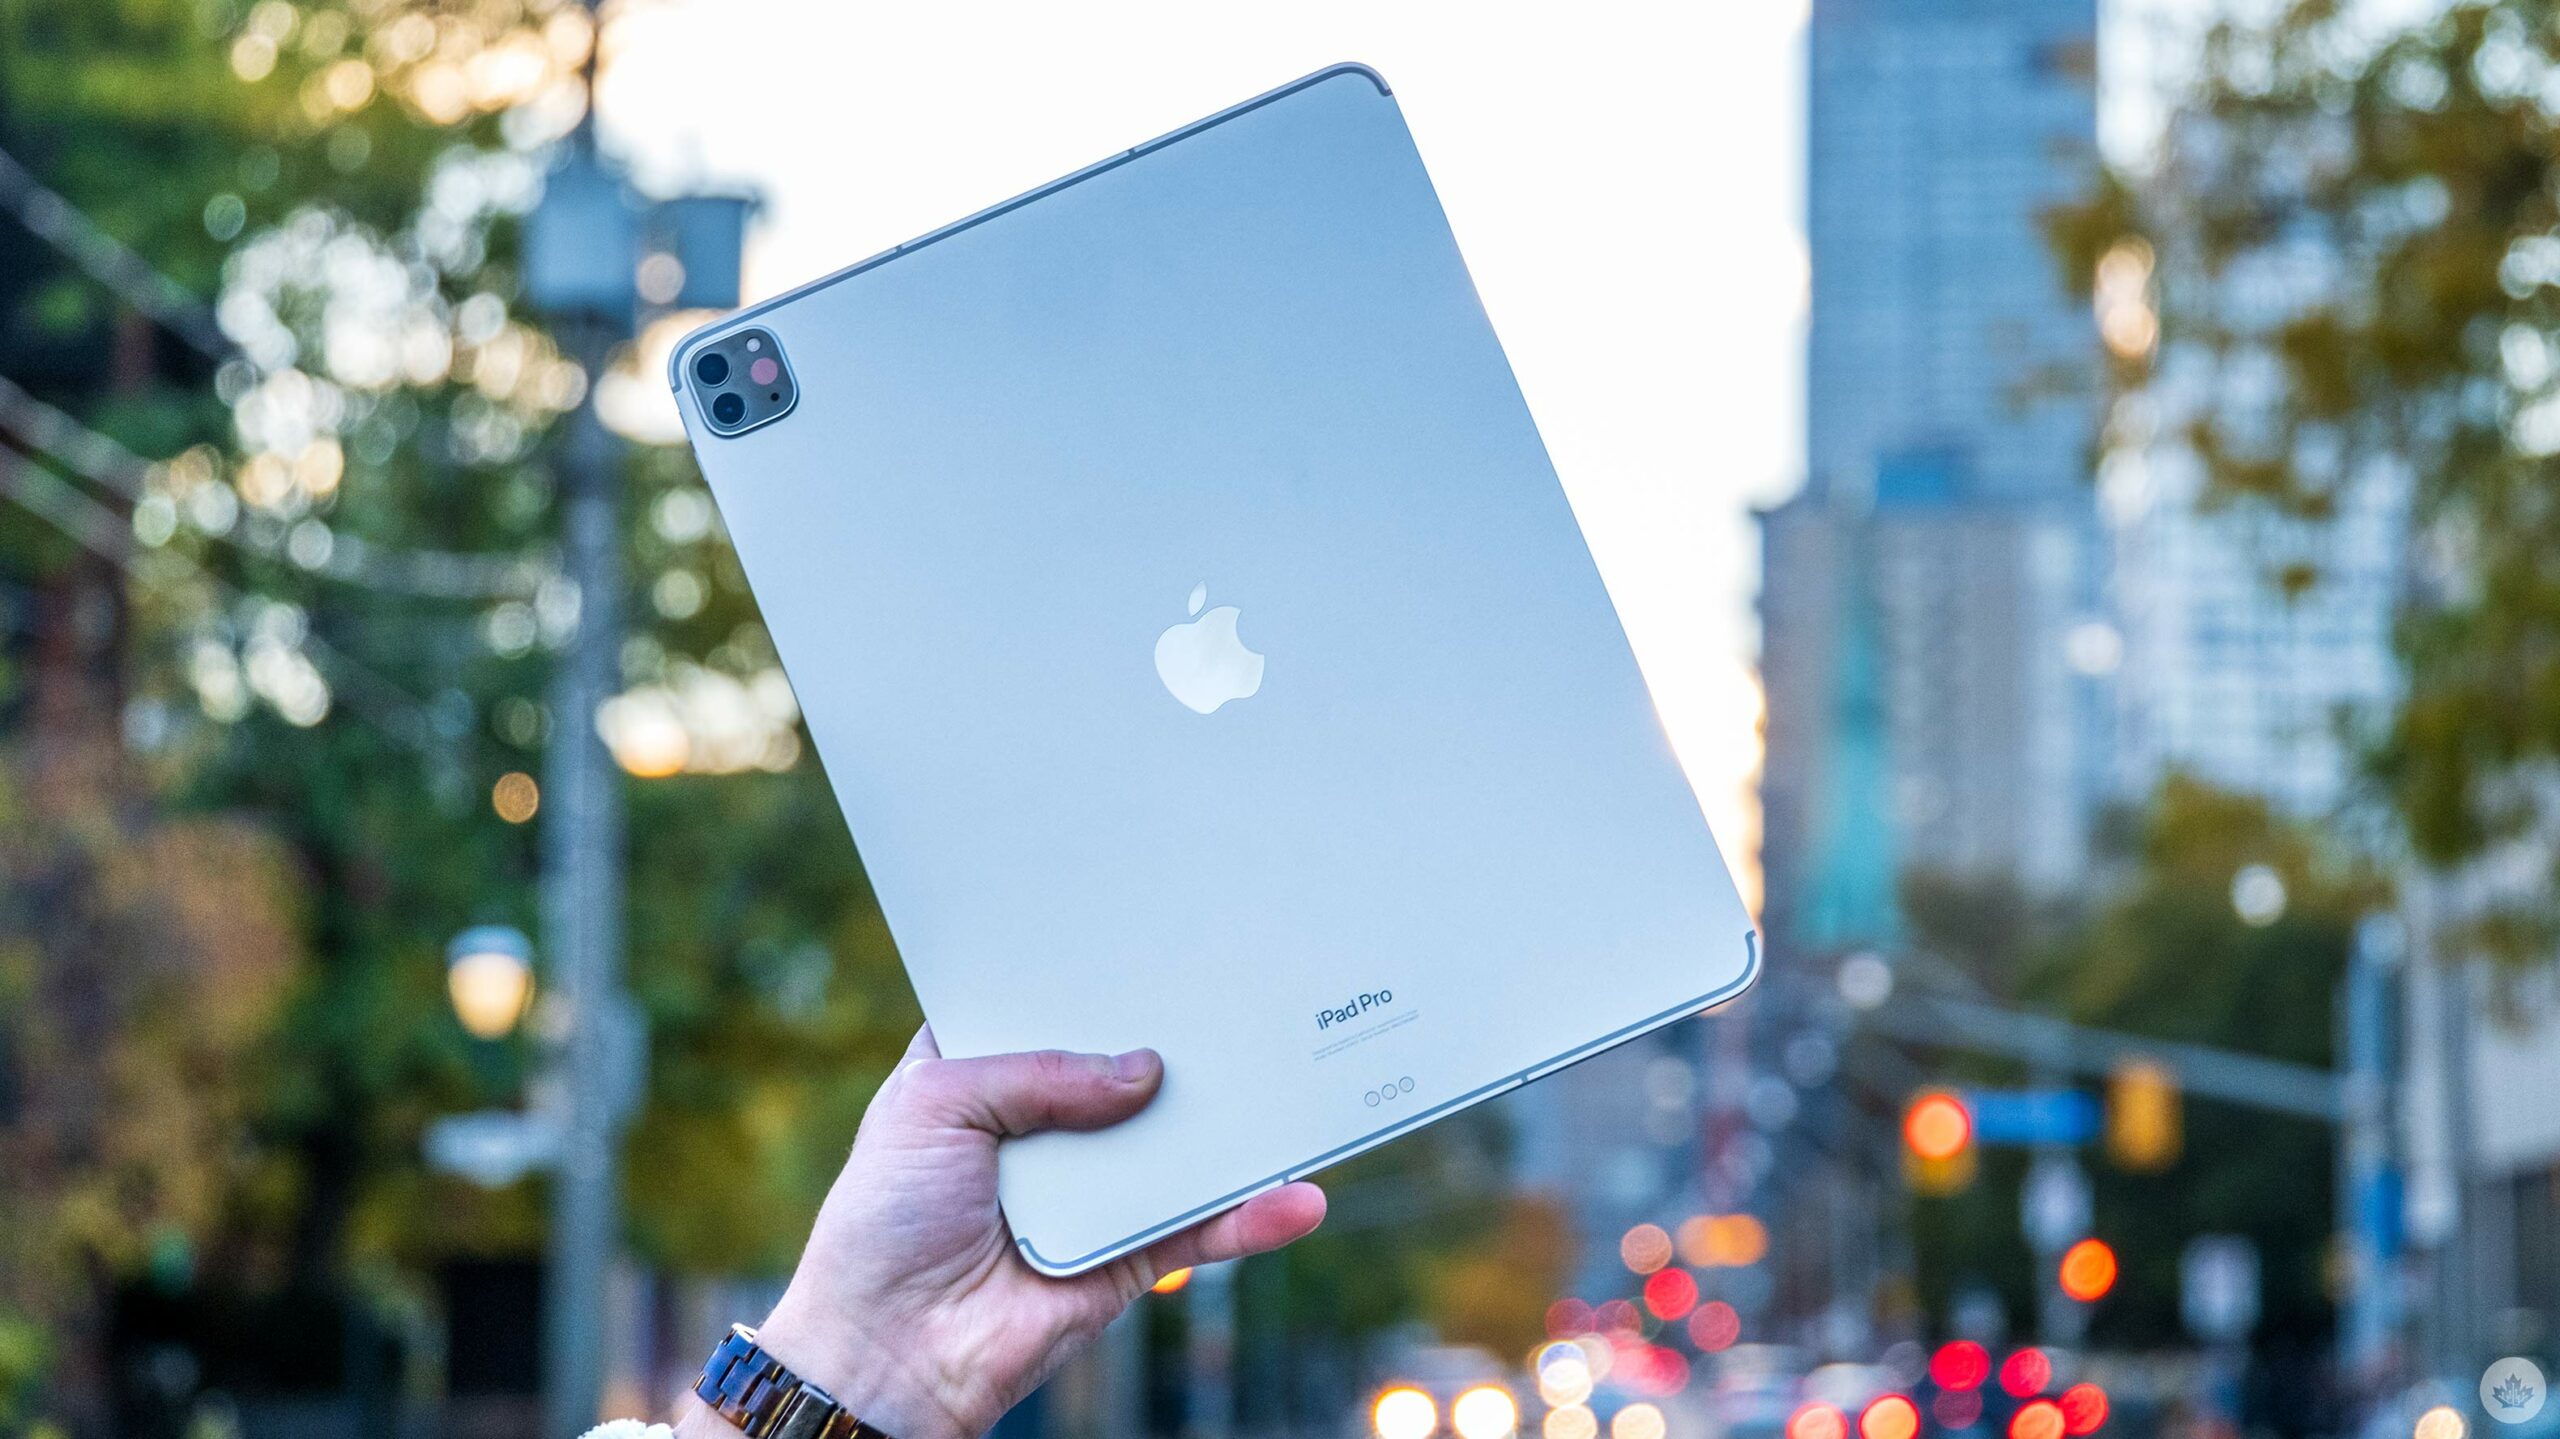 Apple iPad Pro: Major upgrade reportedly coming next year